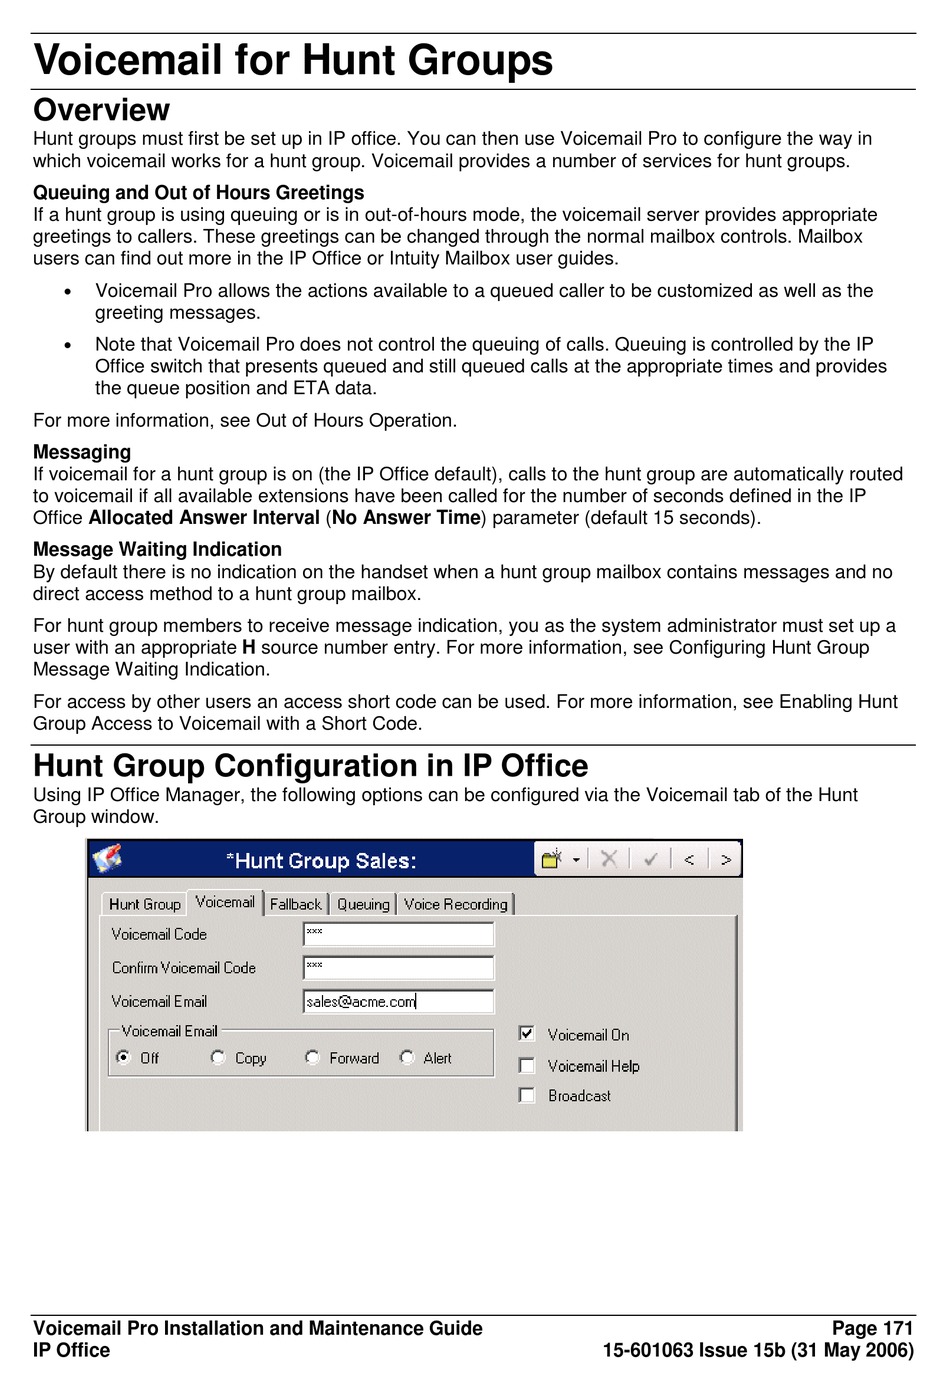 Voicemail For Hunt Groups; Overview; Hunt Group Configuration In Ip Office  - Avaya IP Office Voicemail Pro Installation And Maintenance Manual [Page  171] | ManualsLib